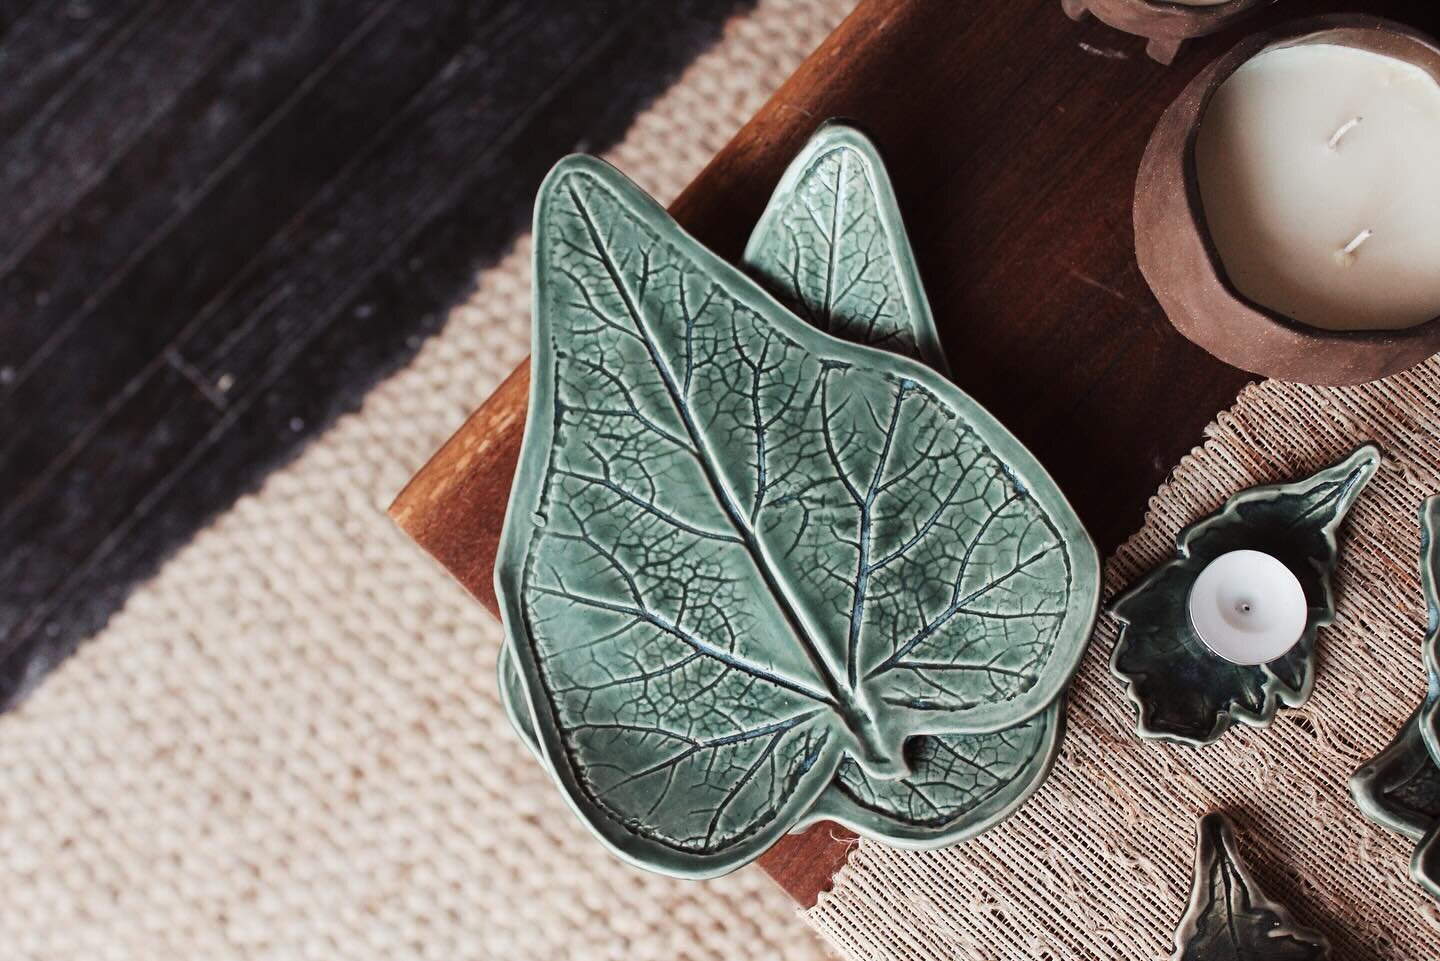 There are a few sassy leaf plates left over from the holidays. These are such a joy to make and take a lot of refinement while at &ldquo;leather hard&rdquo; to get just right.